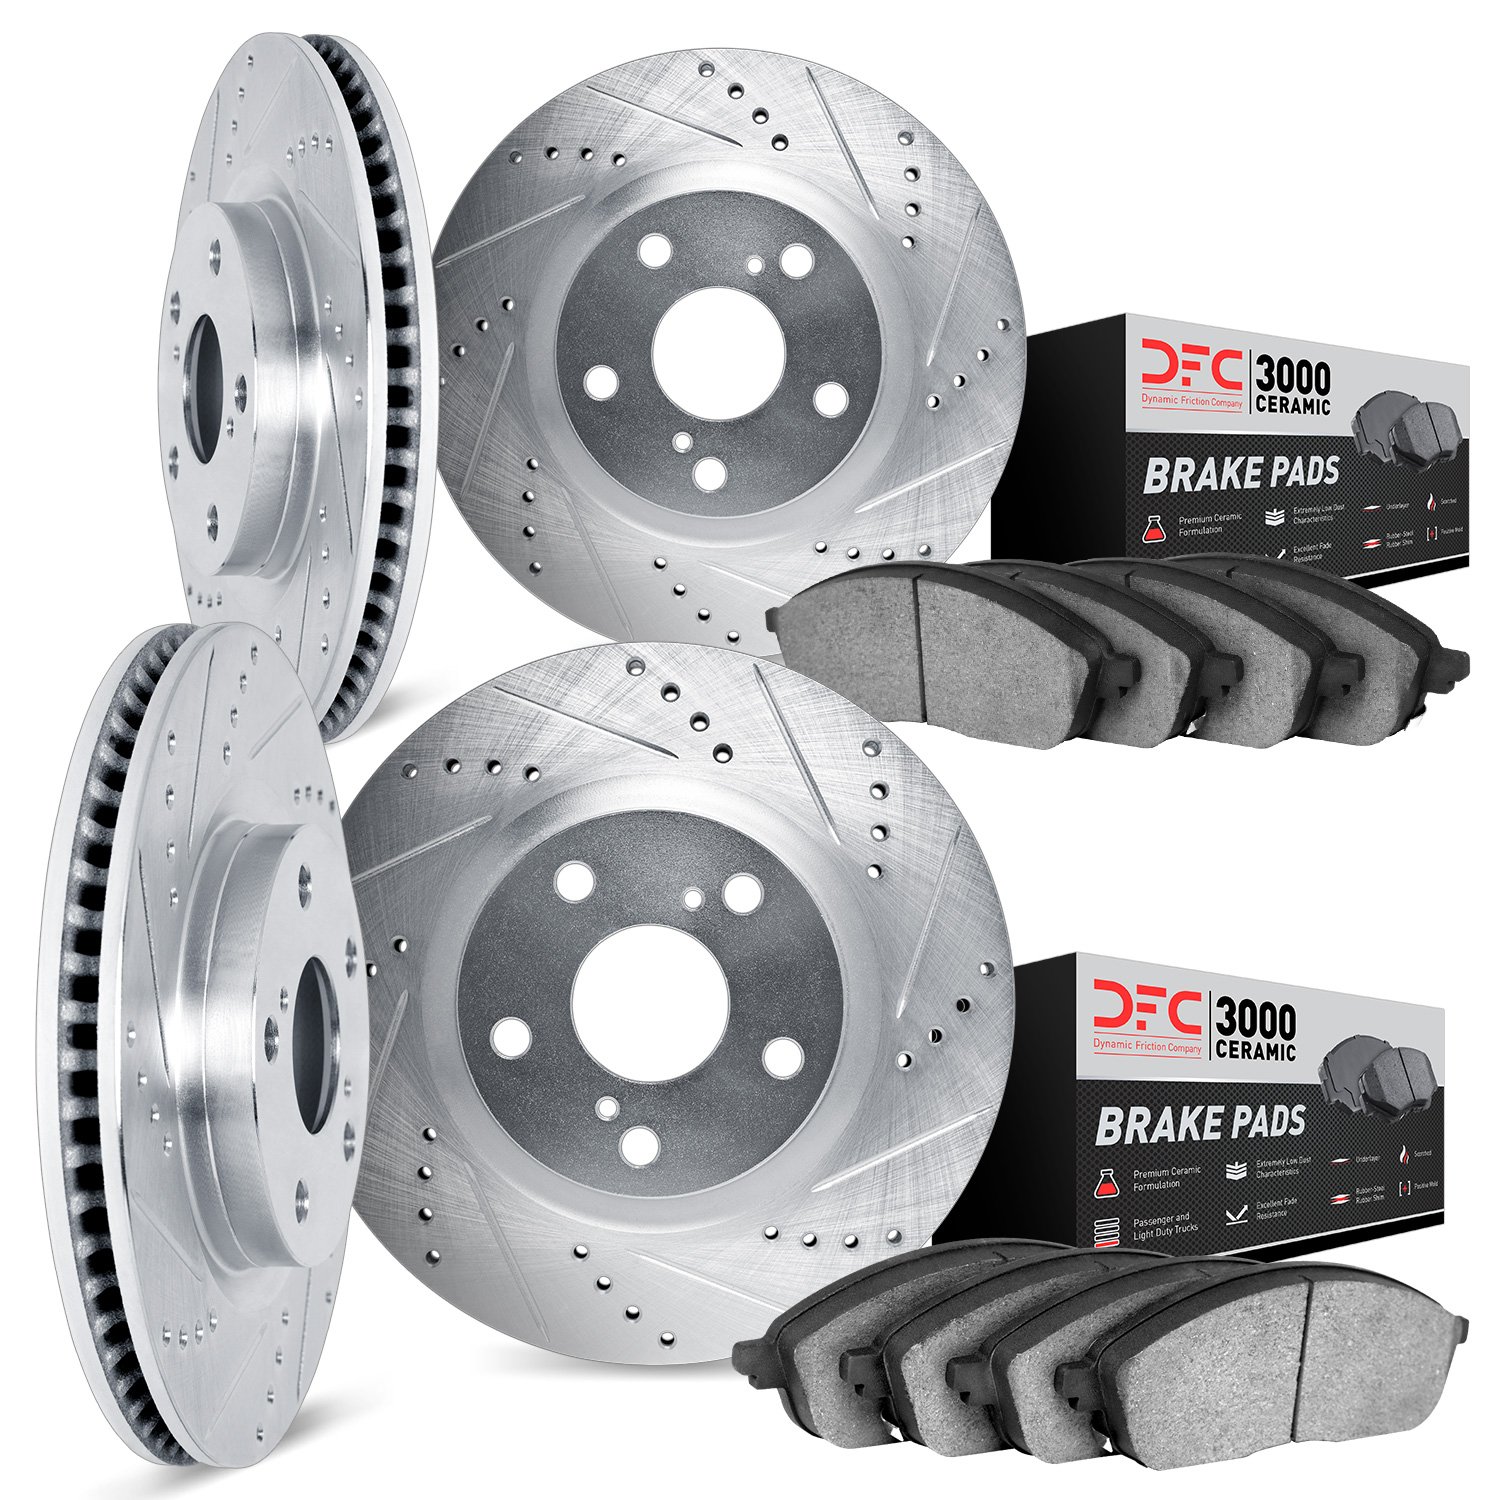 7304-67034 Drilled/Slotted Brake Rotor with 3000-Series Ceramic Brake Pads Kit [Silver], 2004-2017 Infiniti/Nissan, Position: Fr